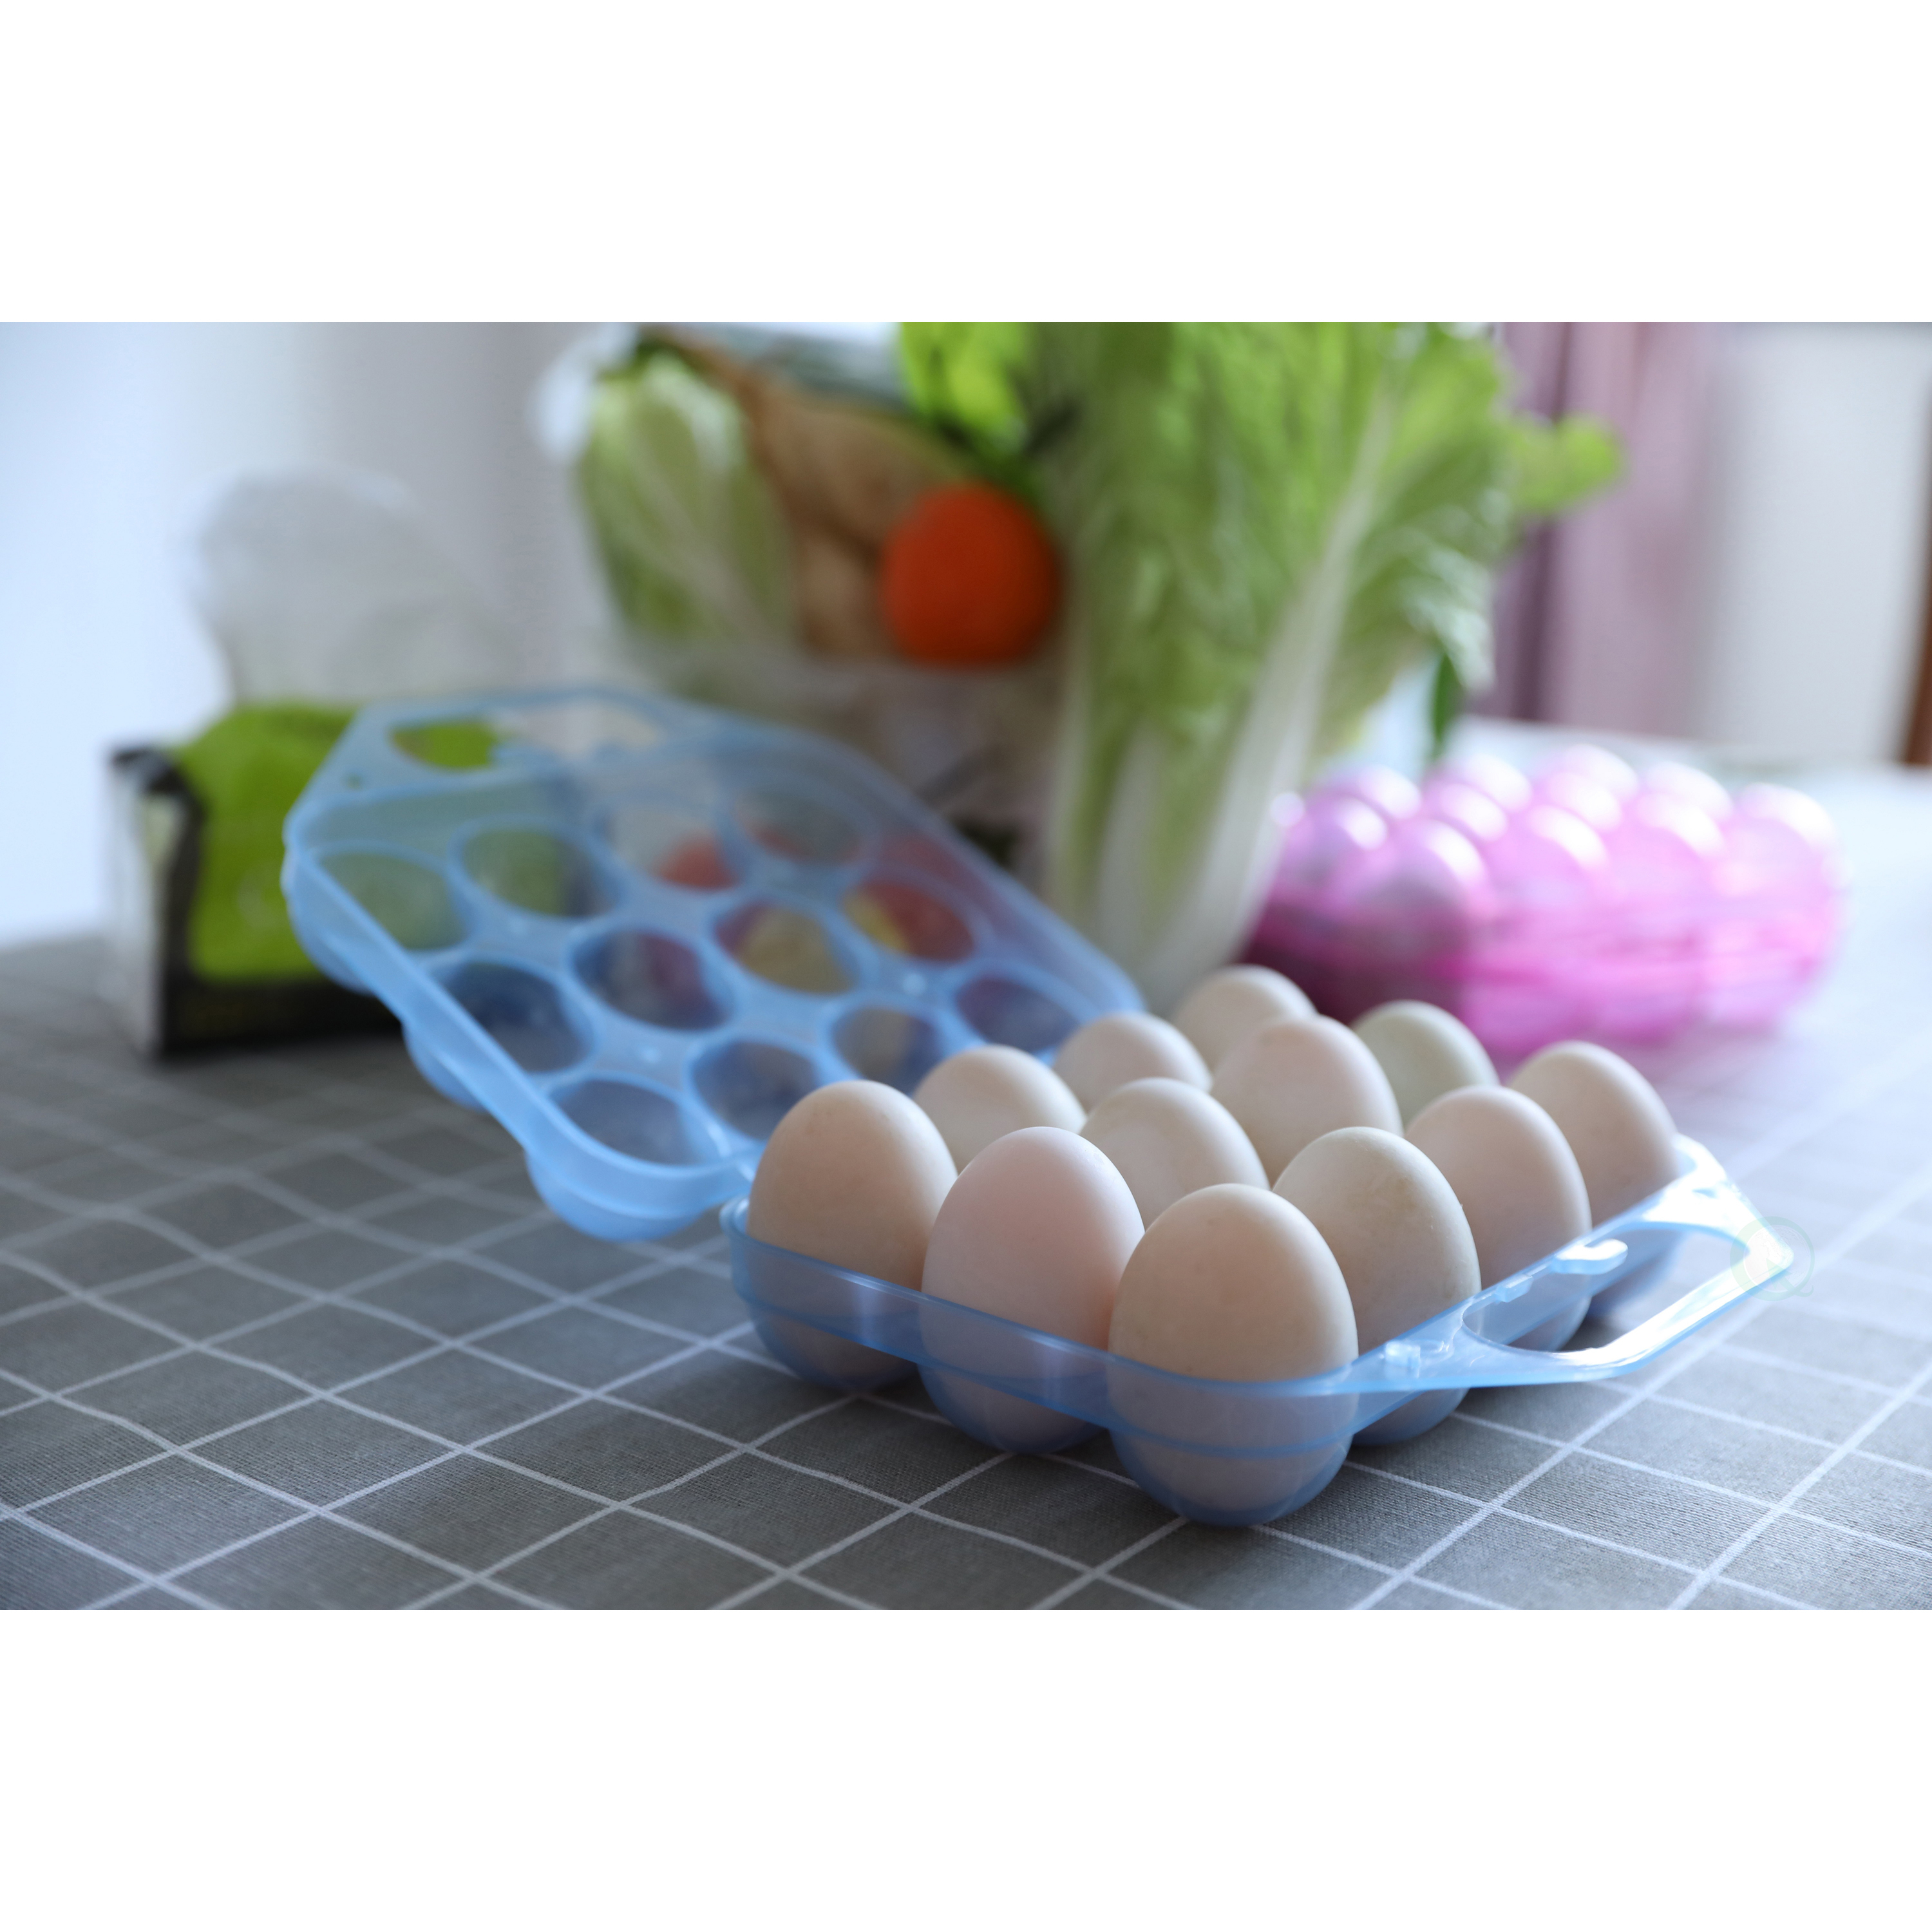 Clear Plastic Egg Carton-12 Egg Holder Carrying Case With Handle - Set Of 2